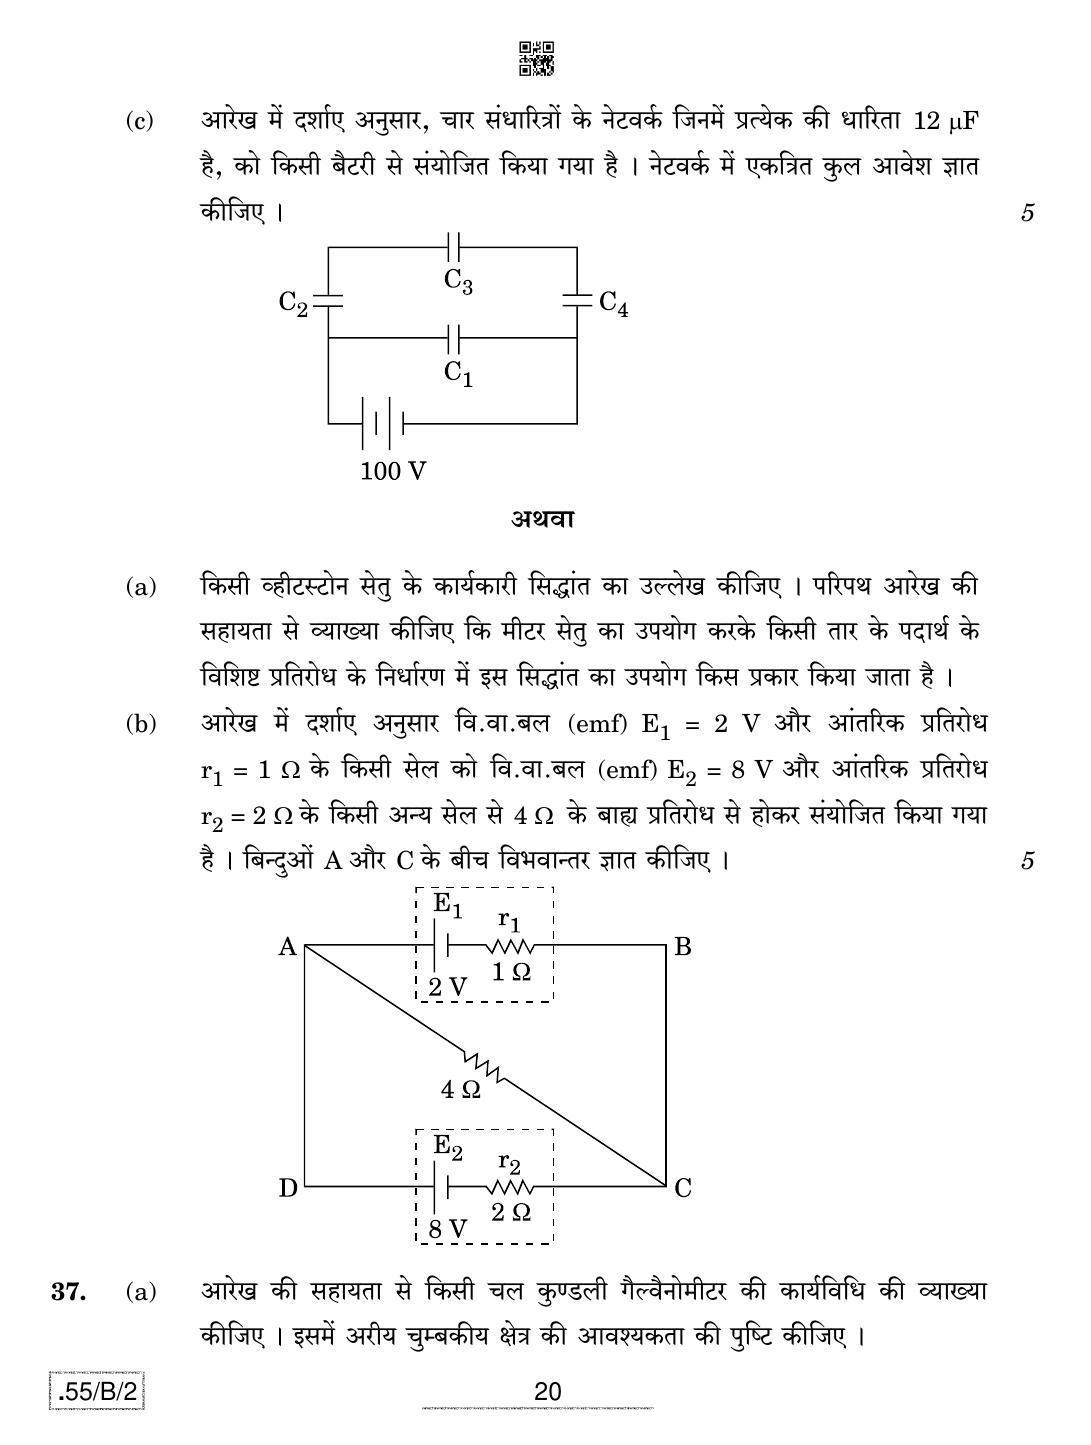 CBSE Class 12 55-C-2 - Physics 2020 Compartment Question Paper - Page 20